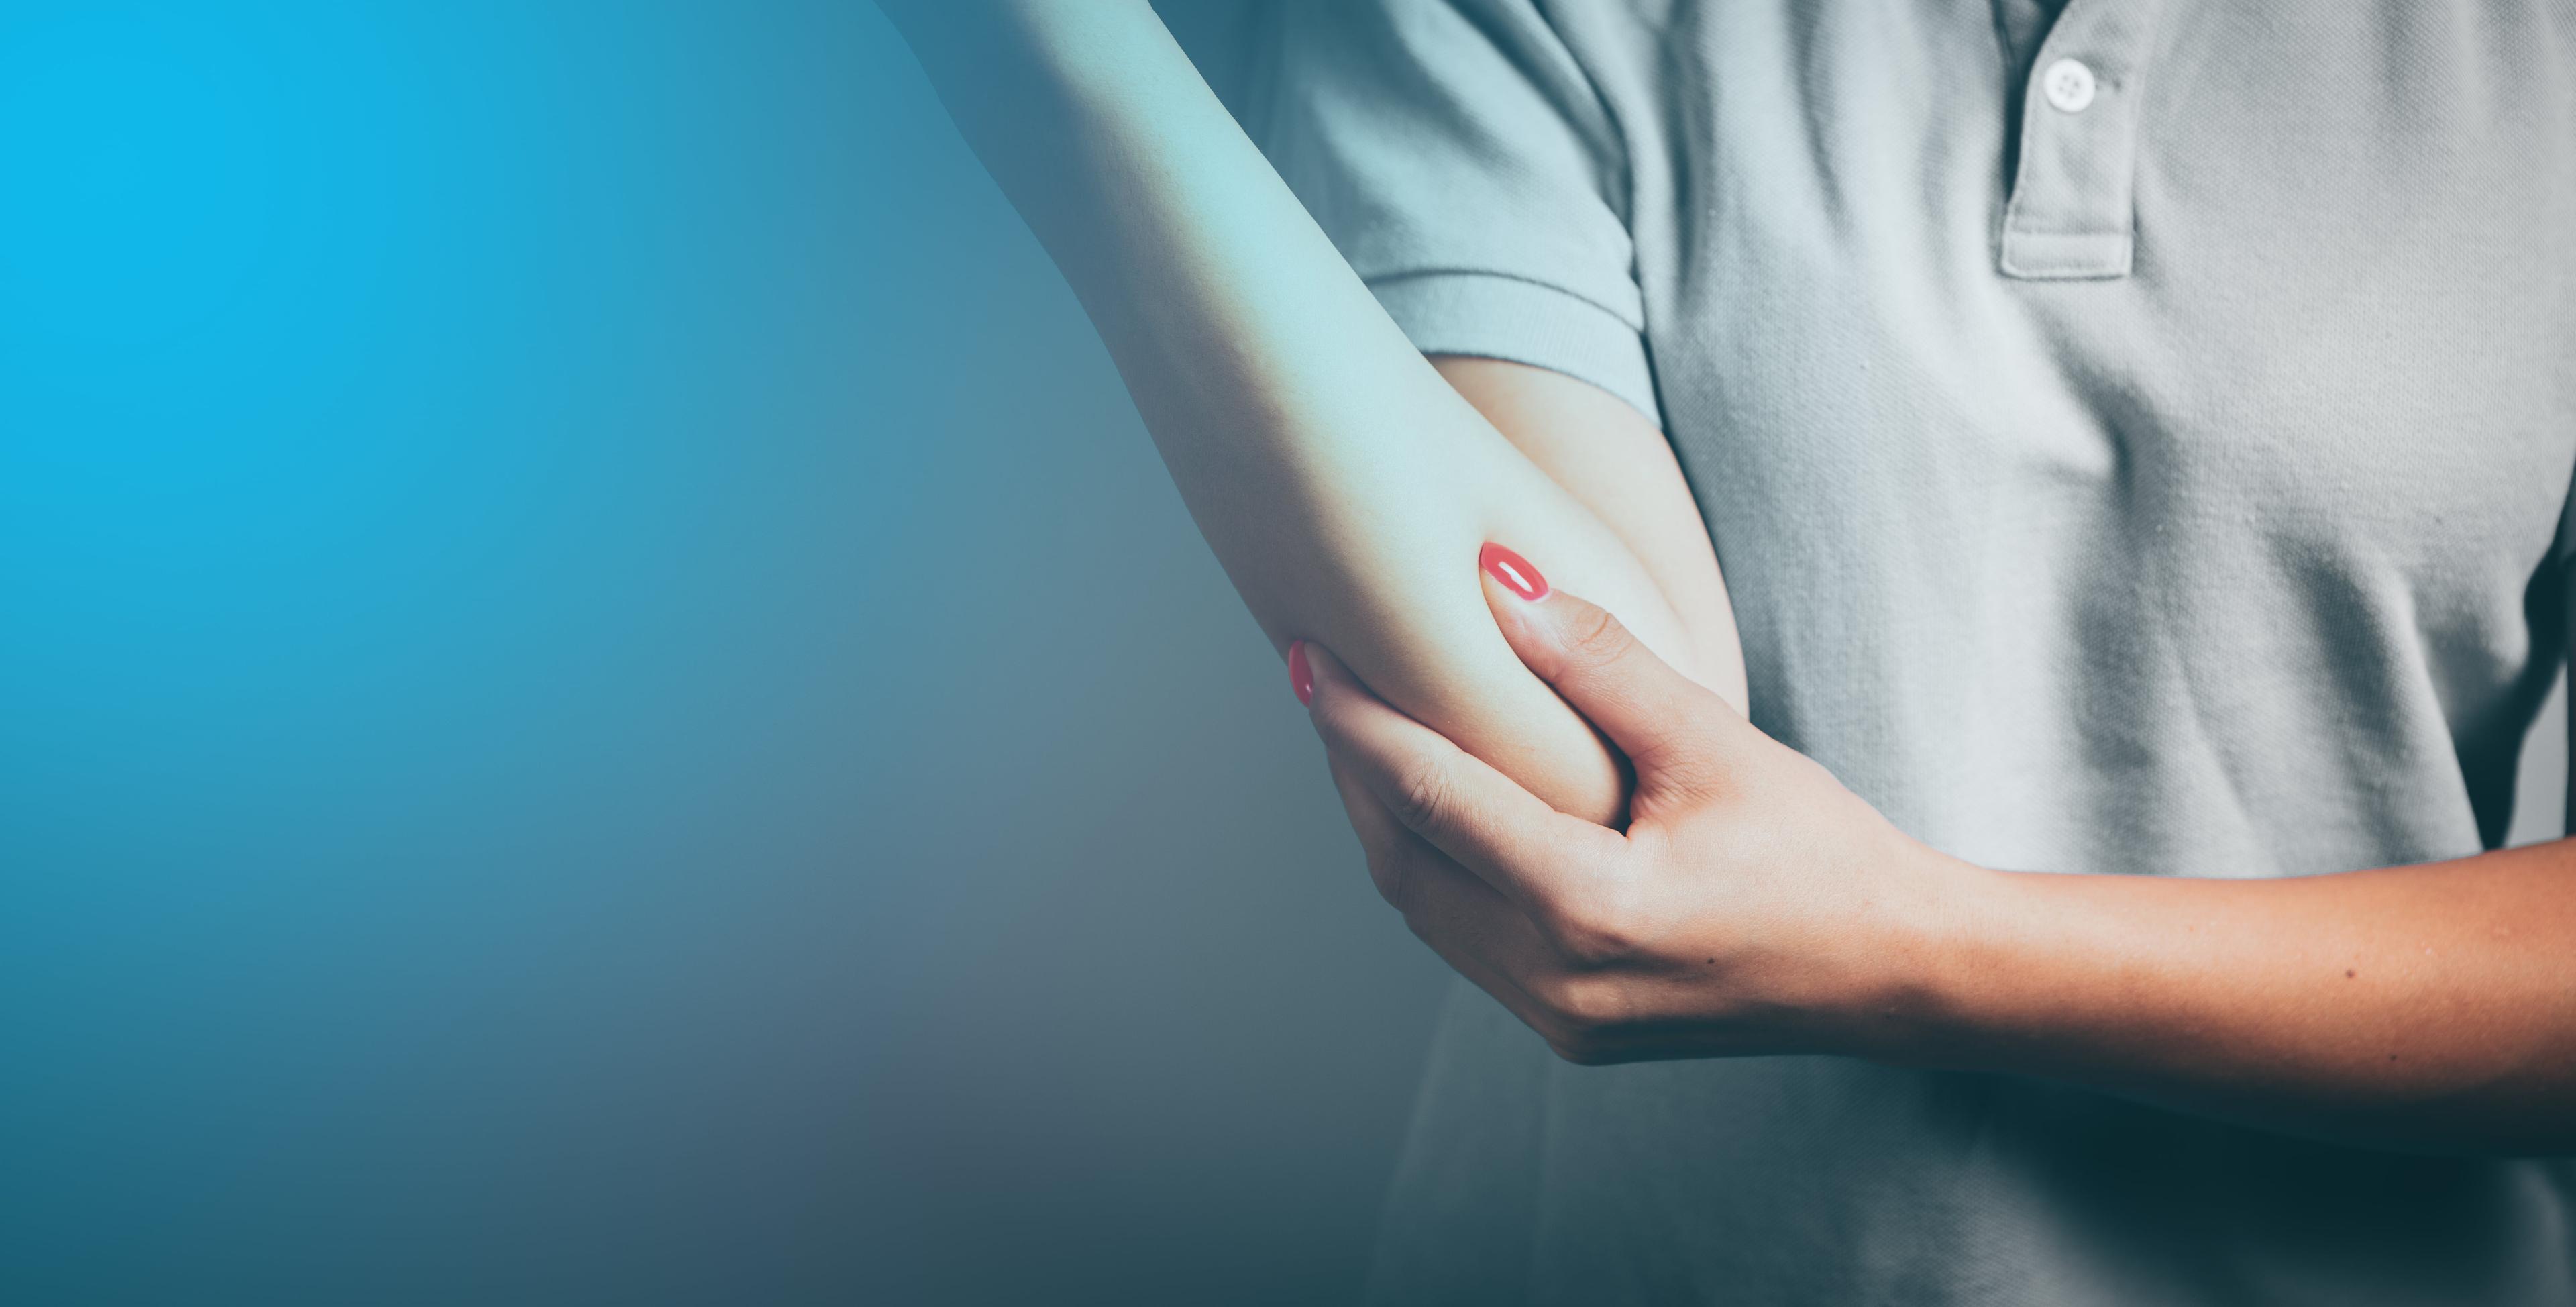 person holding elbow to symbolize pain and injury